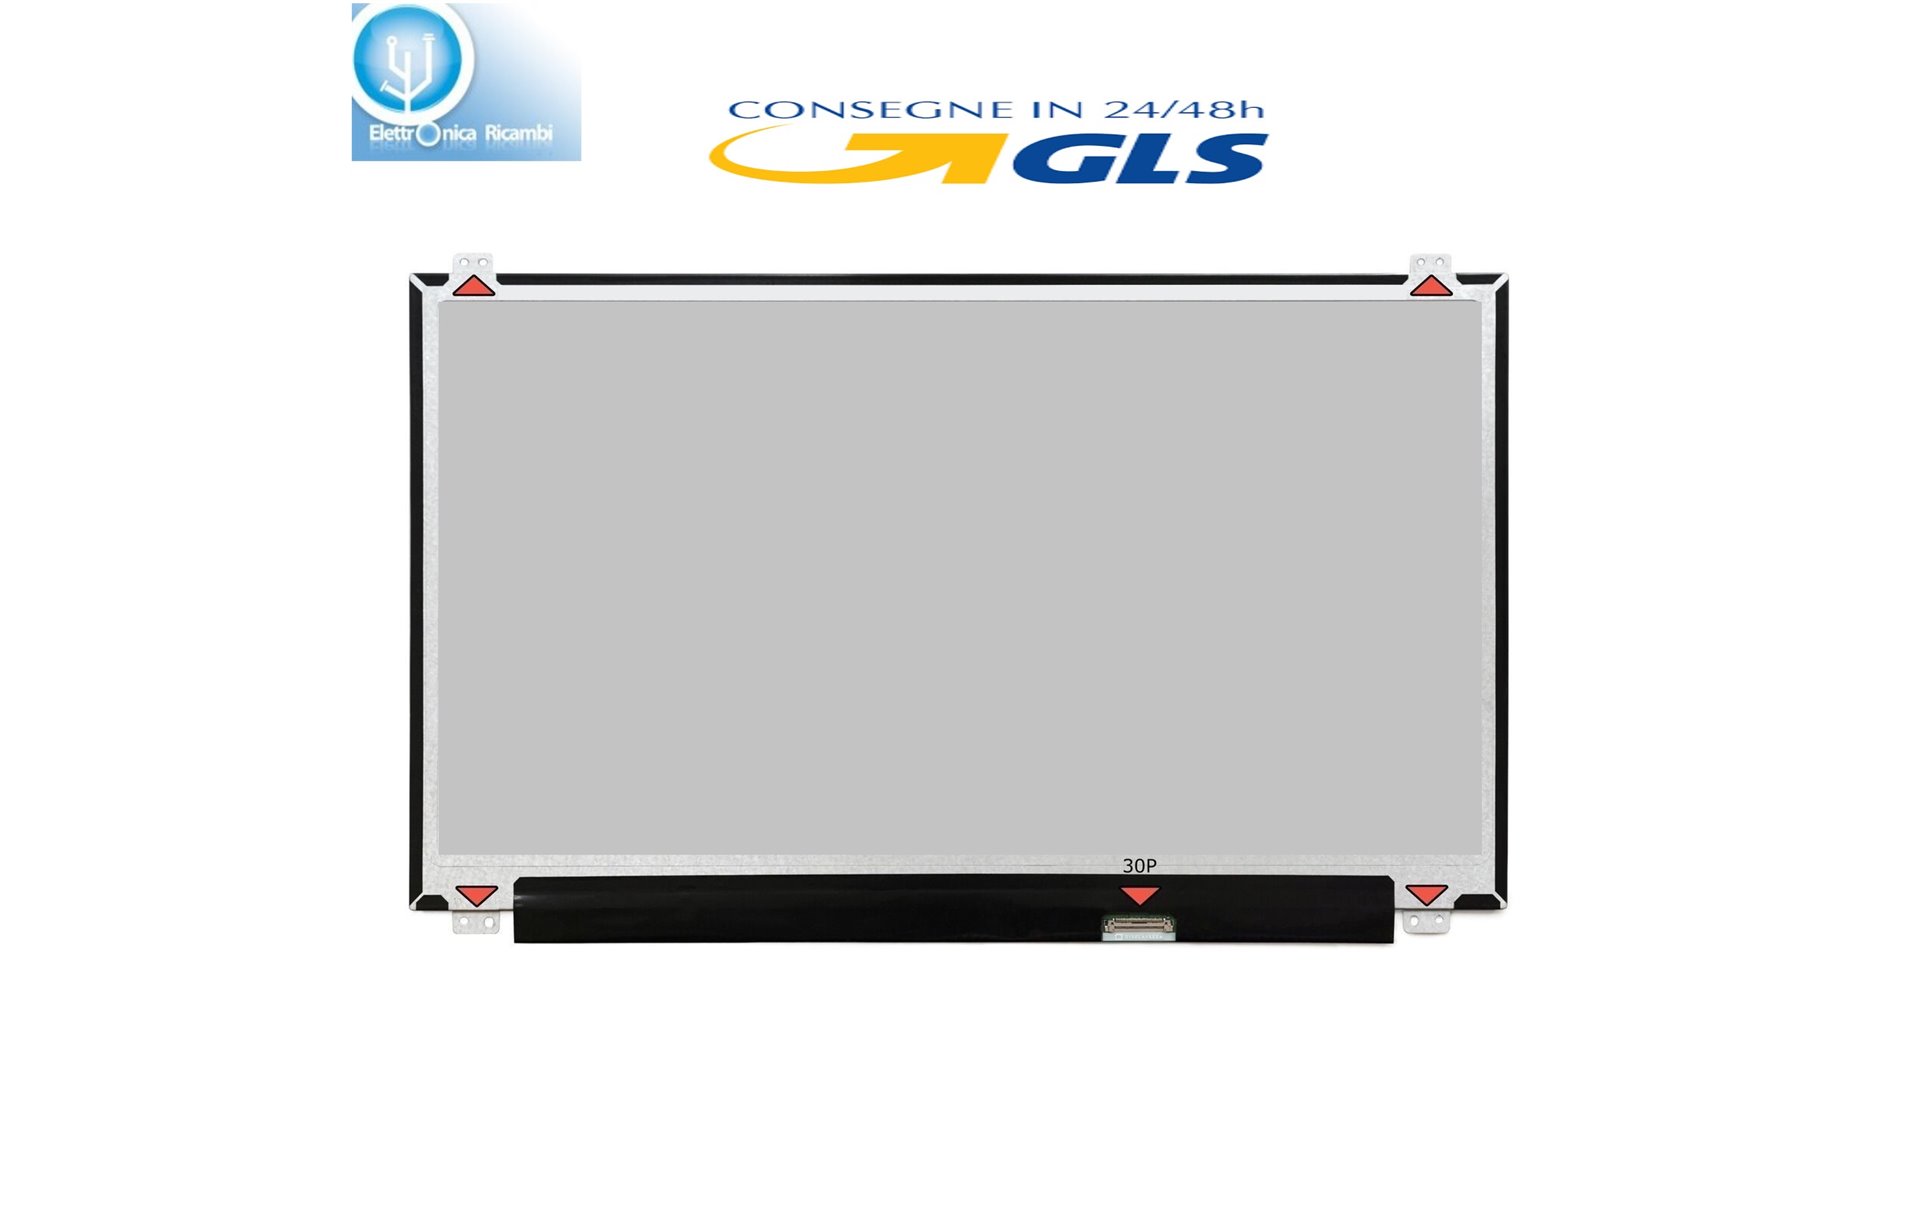 DISPLAY LCD CYBERPOWER FANGBOOK 4 SX6-SE 15.6 1920x1080 LED 30 pin